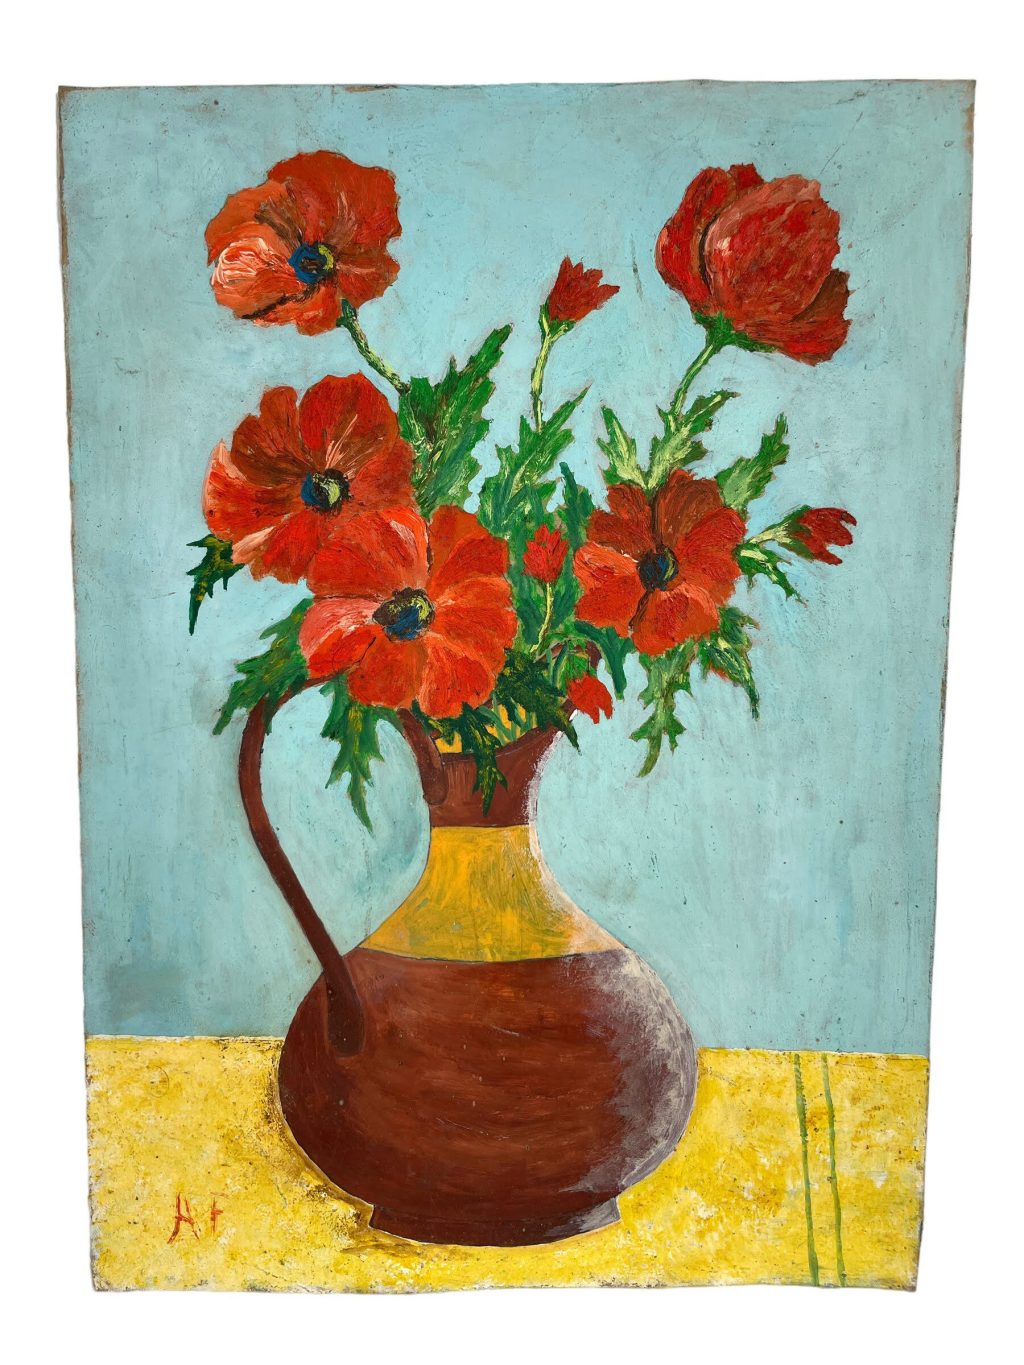 Vintage French Still Life Red Poppies In Jug On Board Painting Acrylic c1970’s